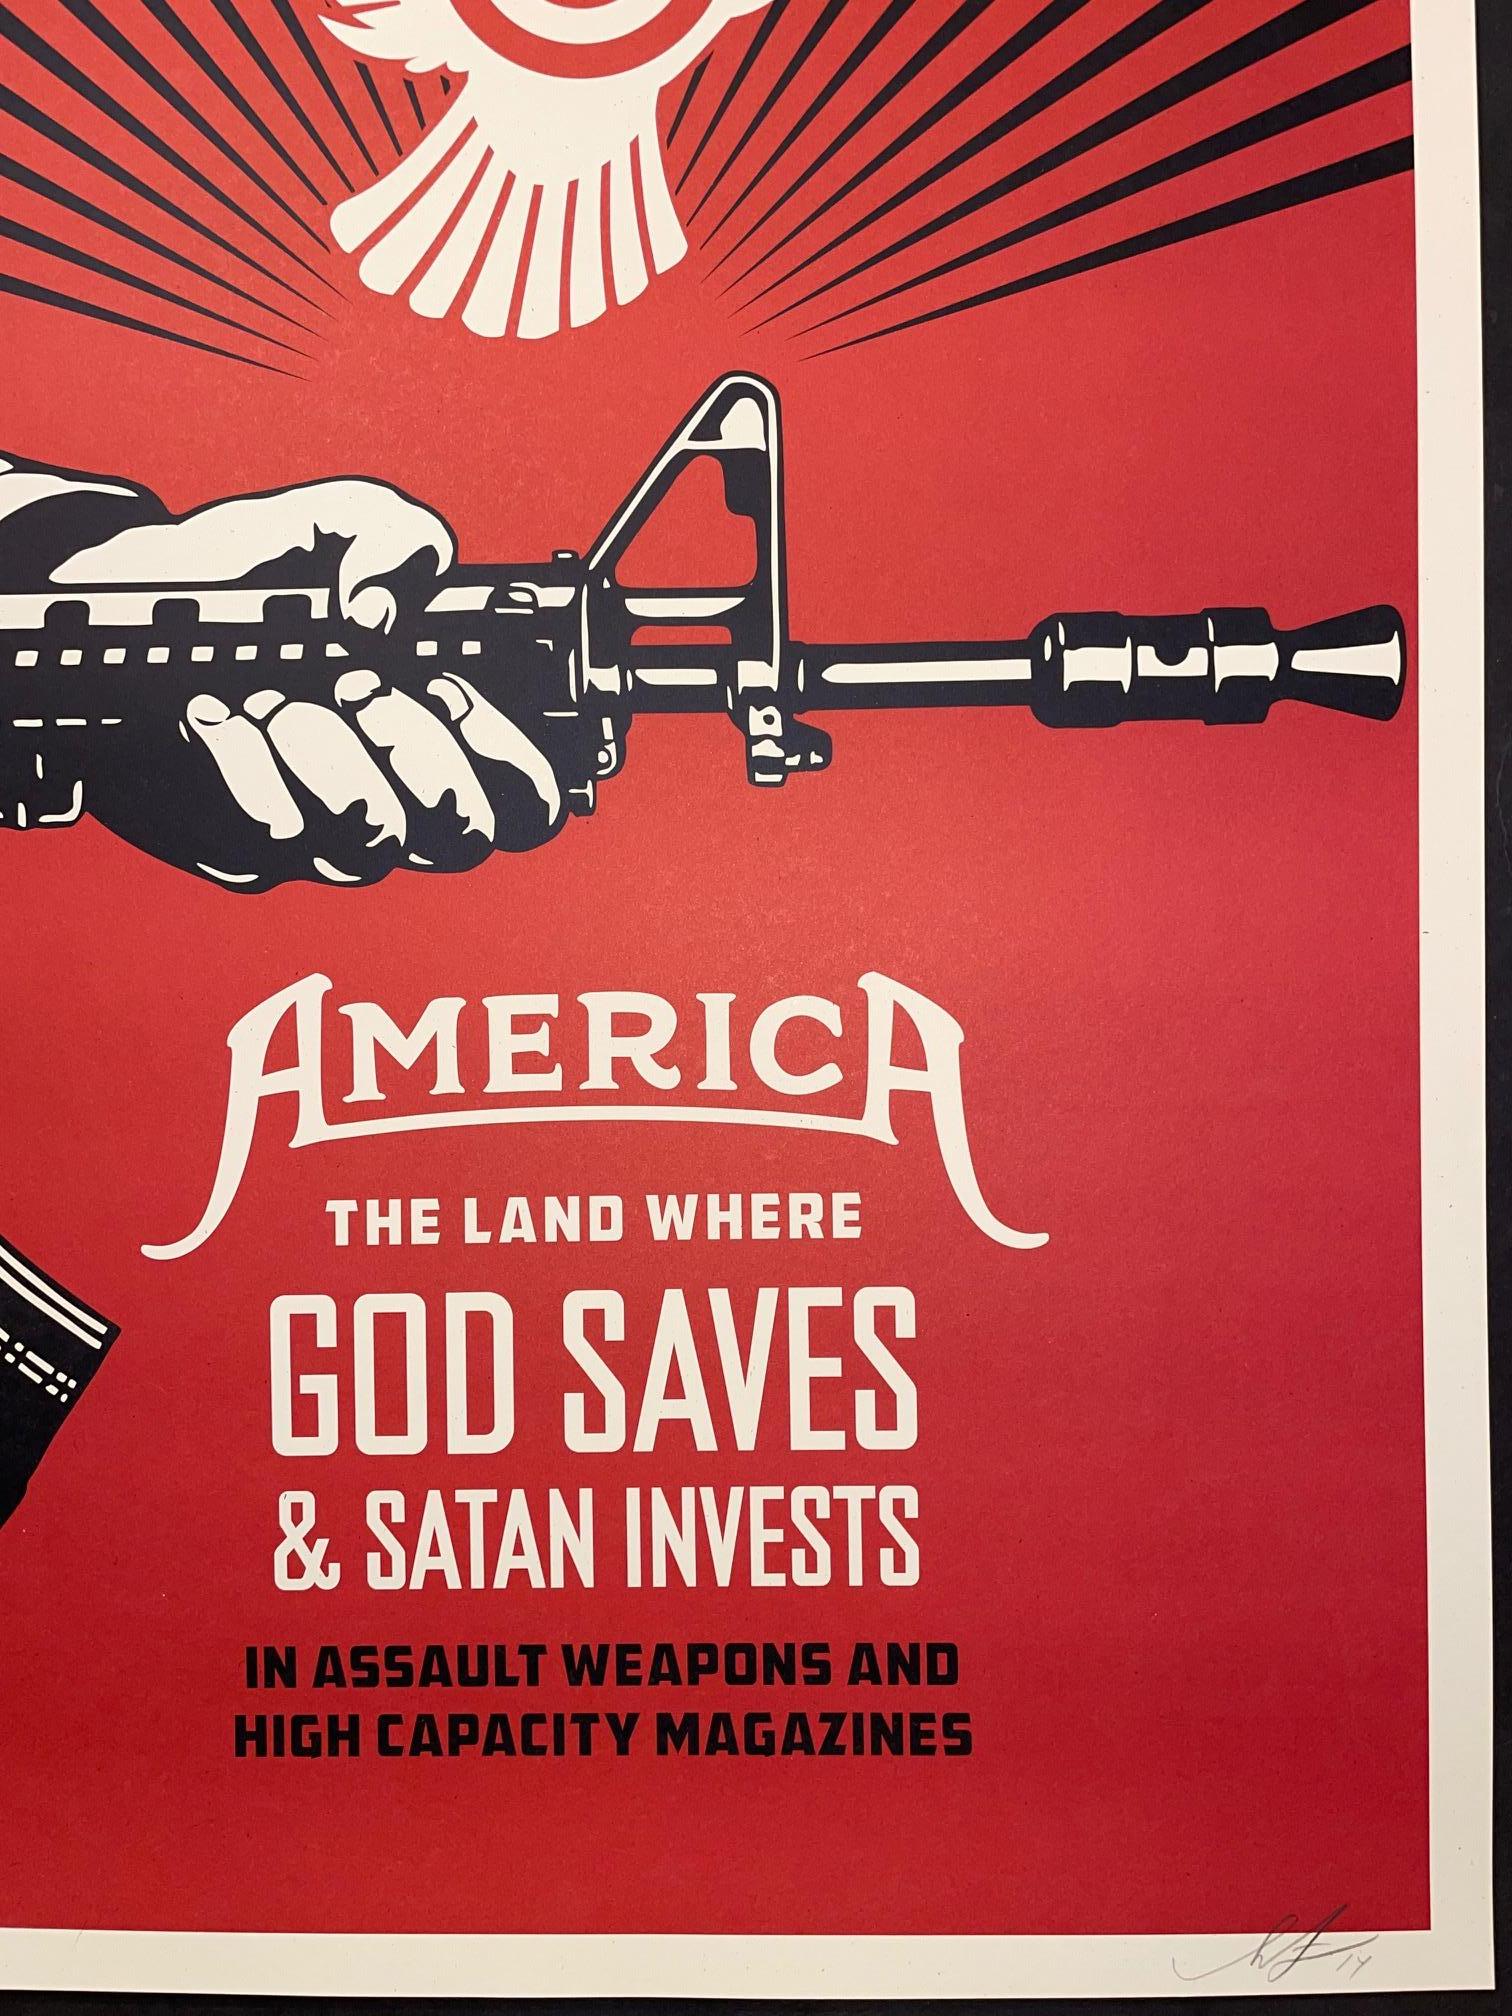 A portion of the proceeds from this print will go to a, yet to be determined, common sense gun law advocacy group. We need to put pressure on the politicians!
-Shepard Fairey


This GOD SAVES & SATAN INVESTS print was inspired by the multiple school